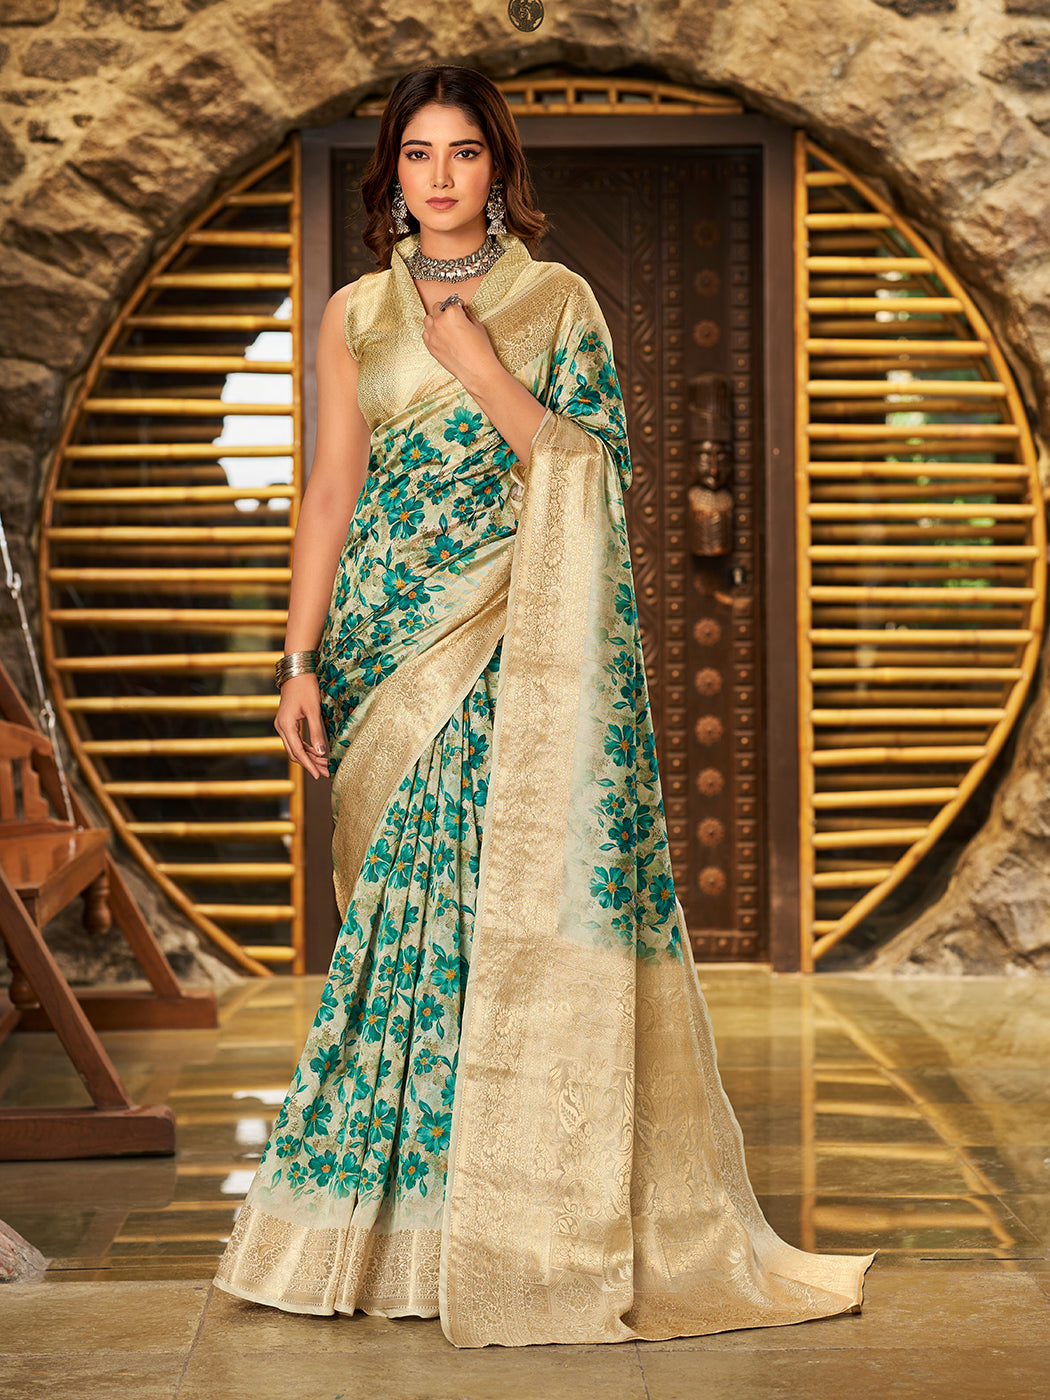 Gorgeous Sea Green Color Saree With Floral Patterns Design .